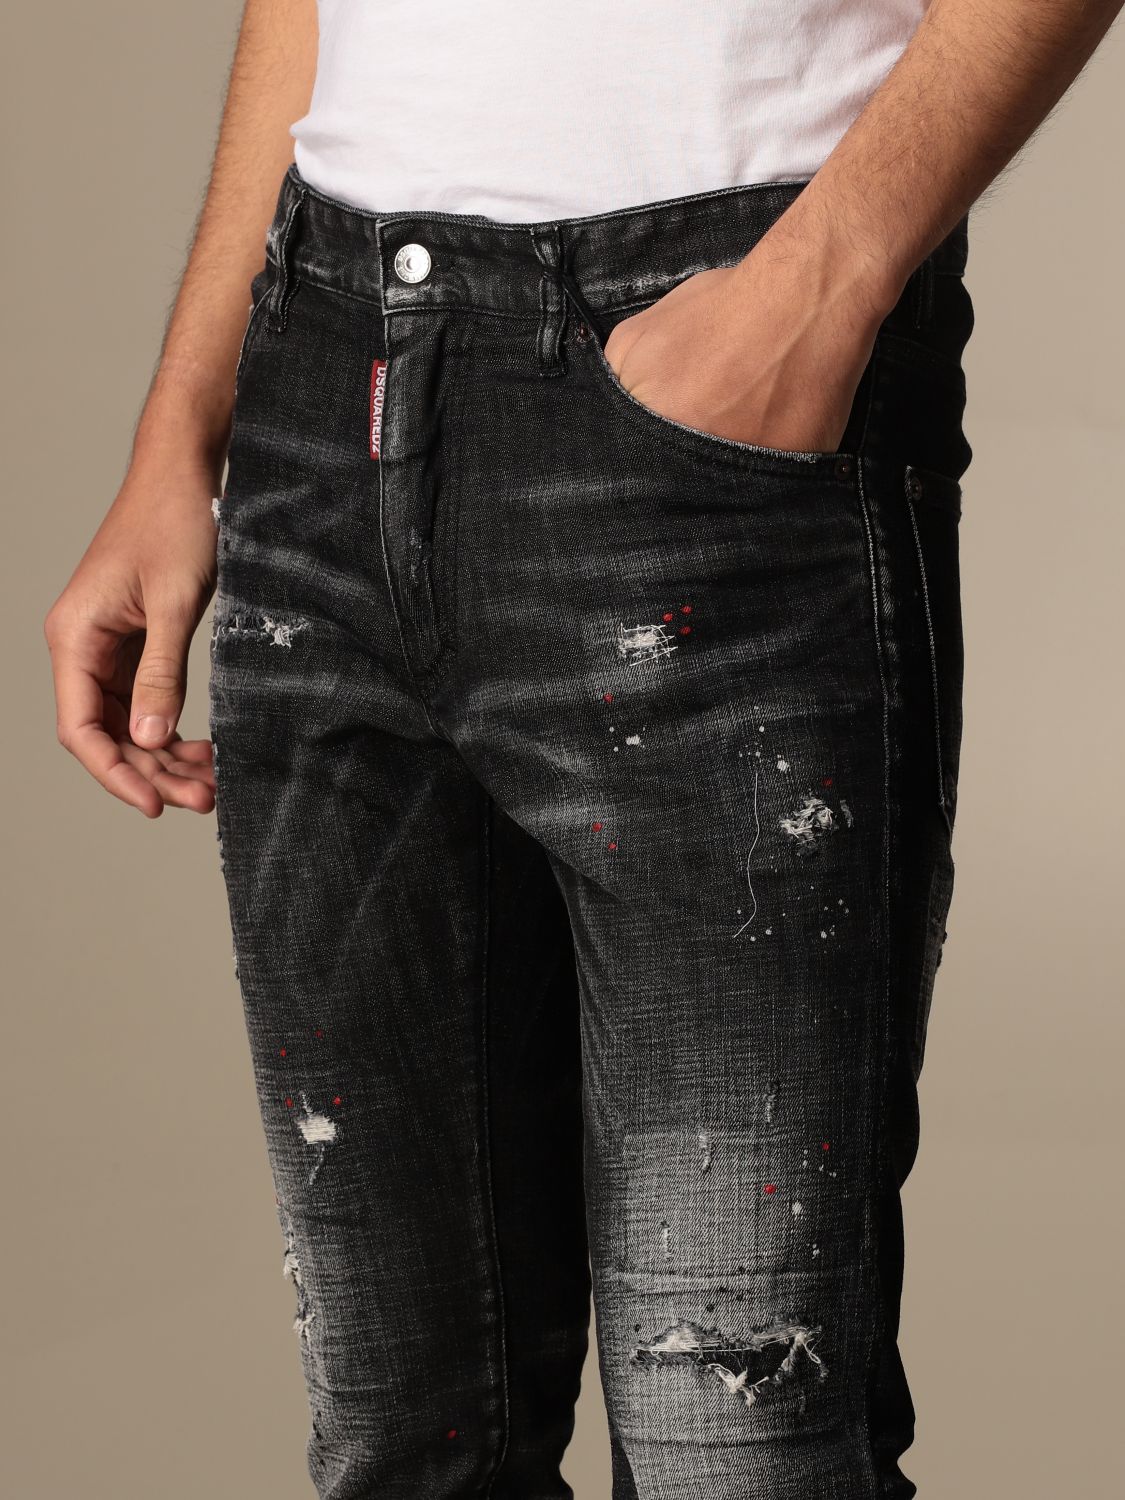 DSQUARED2: jeans in used denim with tears | Jeans Dsquared2 Men Black ...